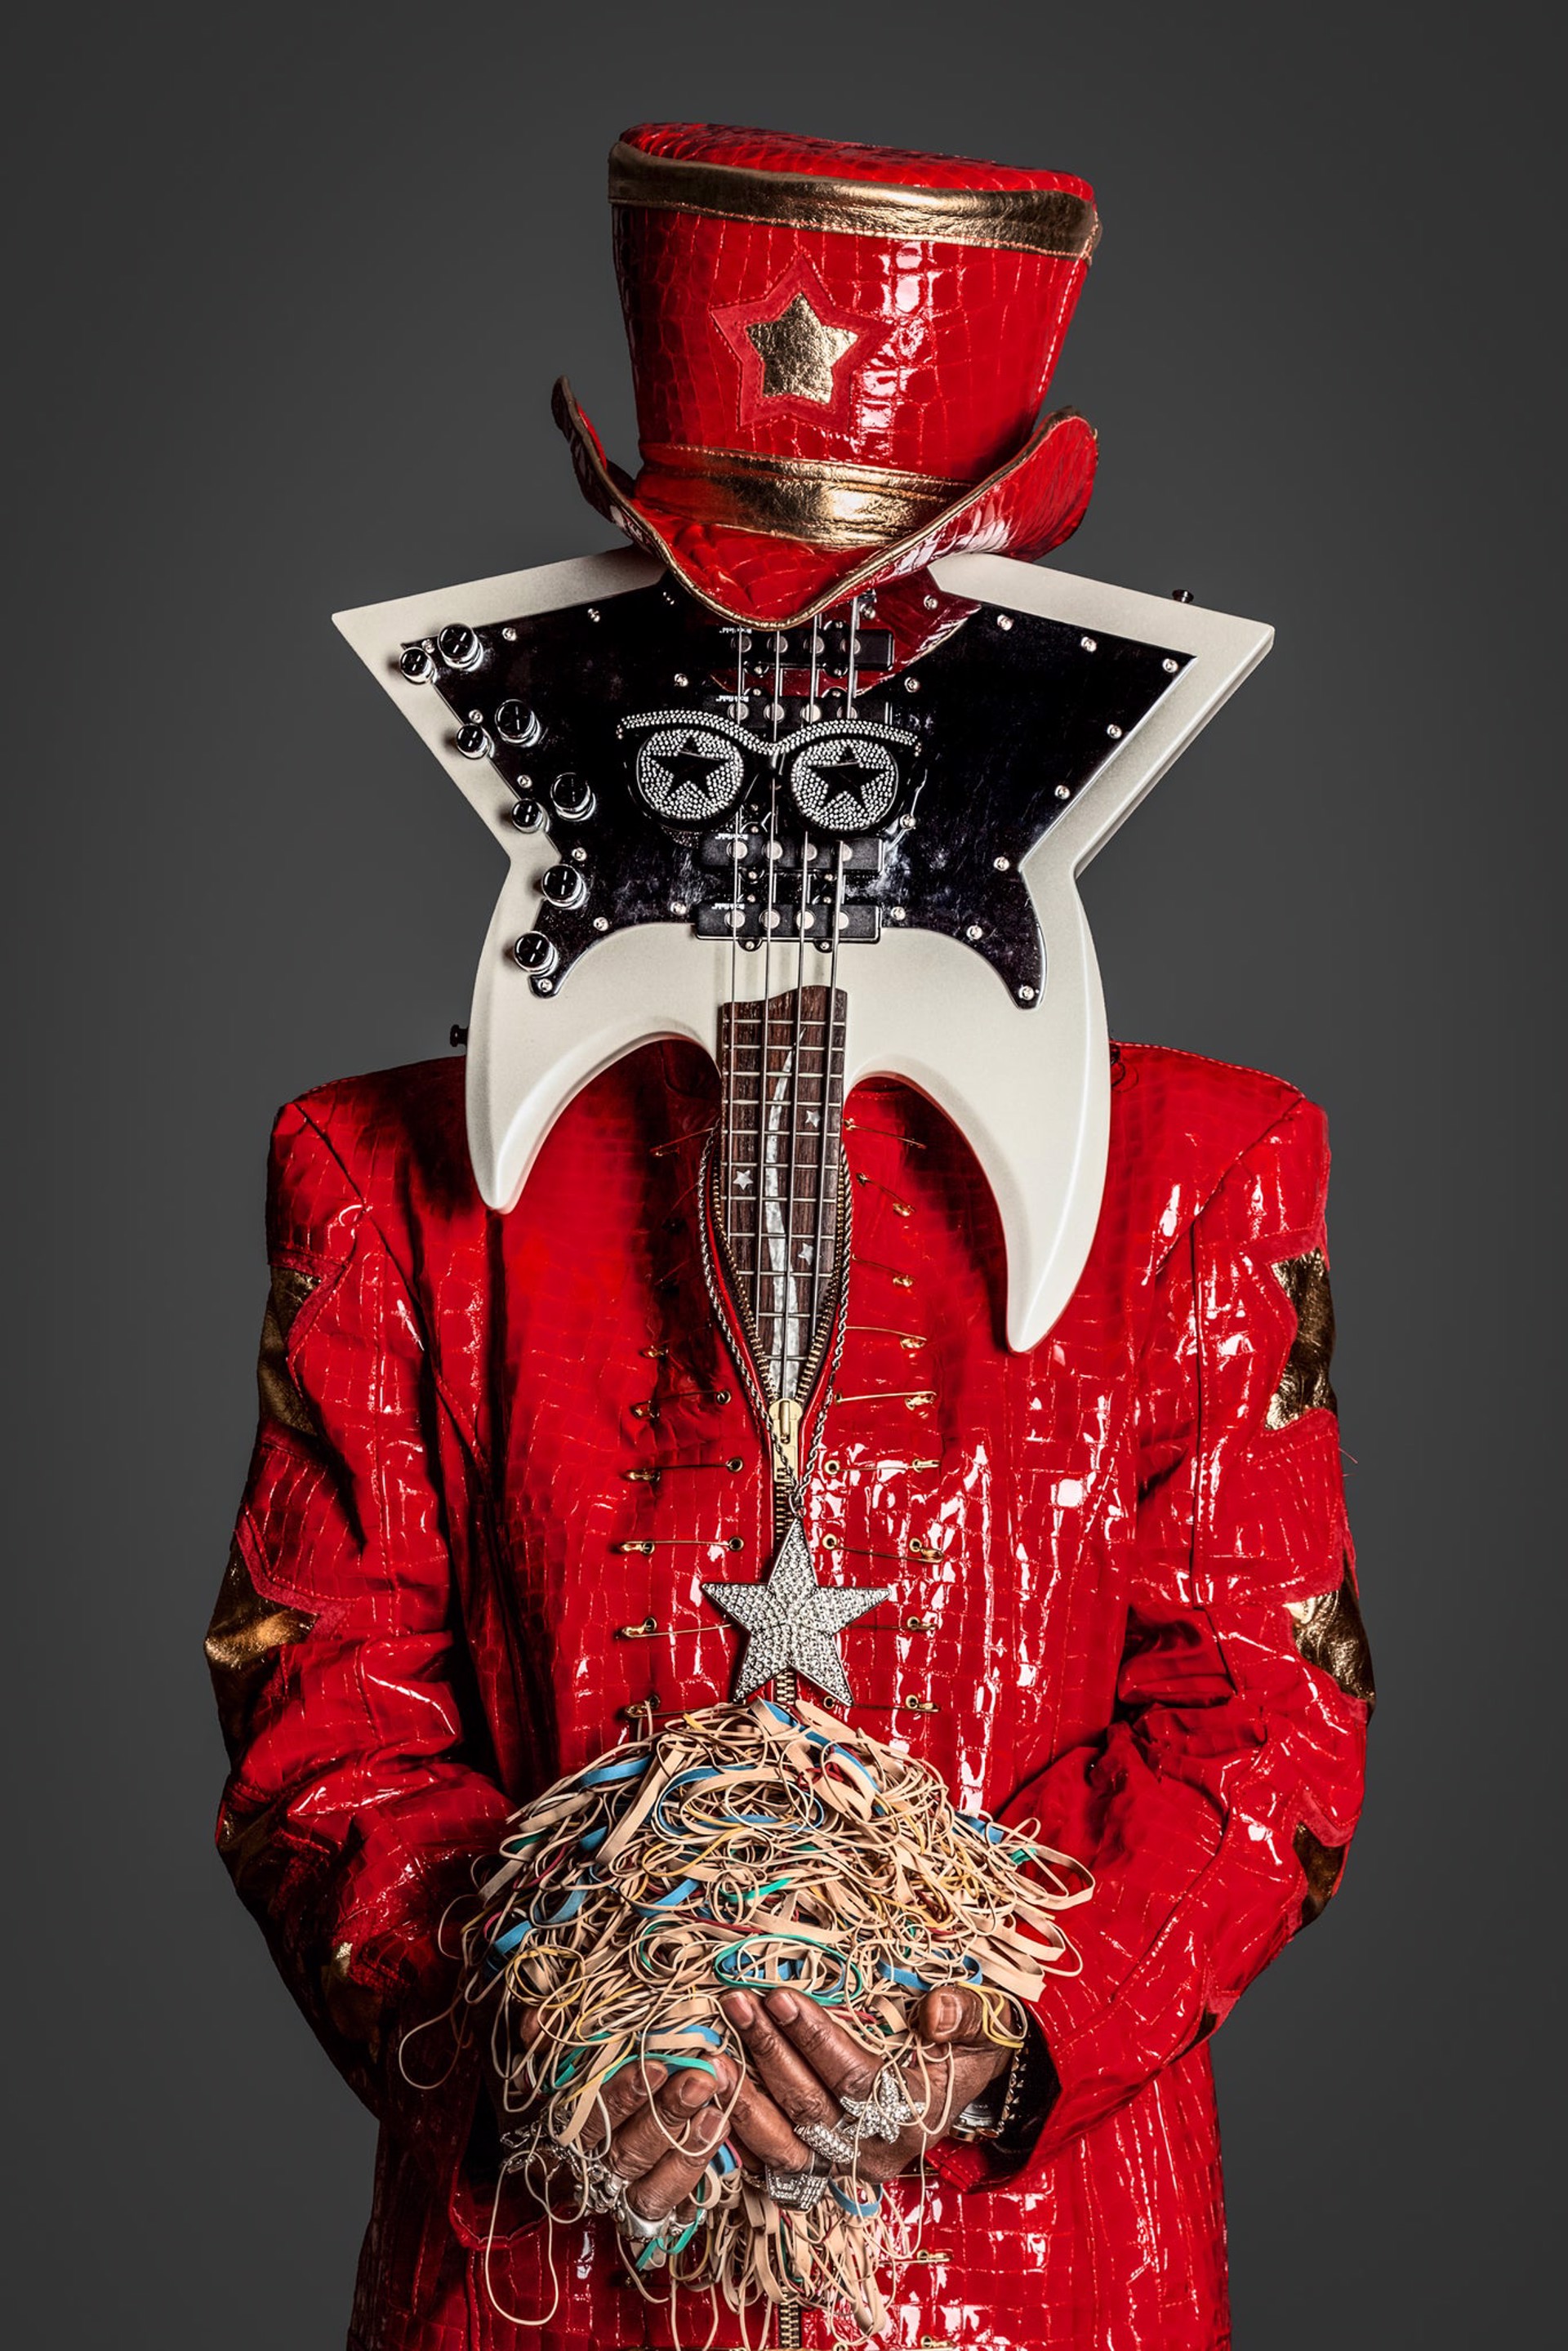 Bootsy Collins by Michael Weintrob